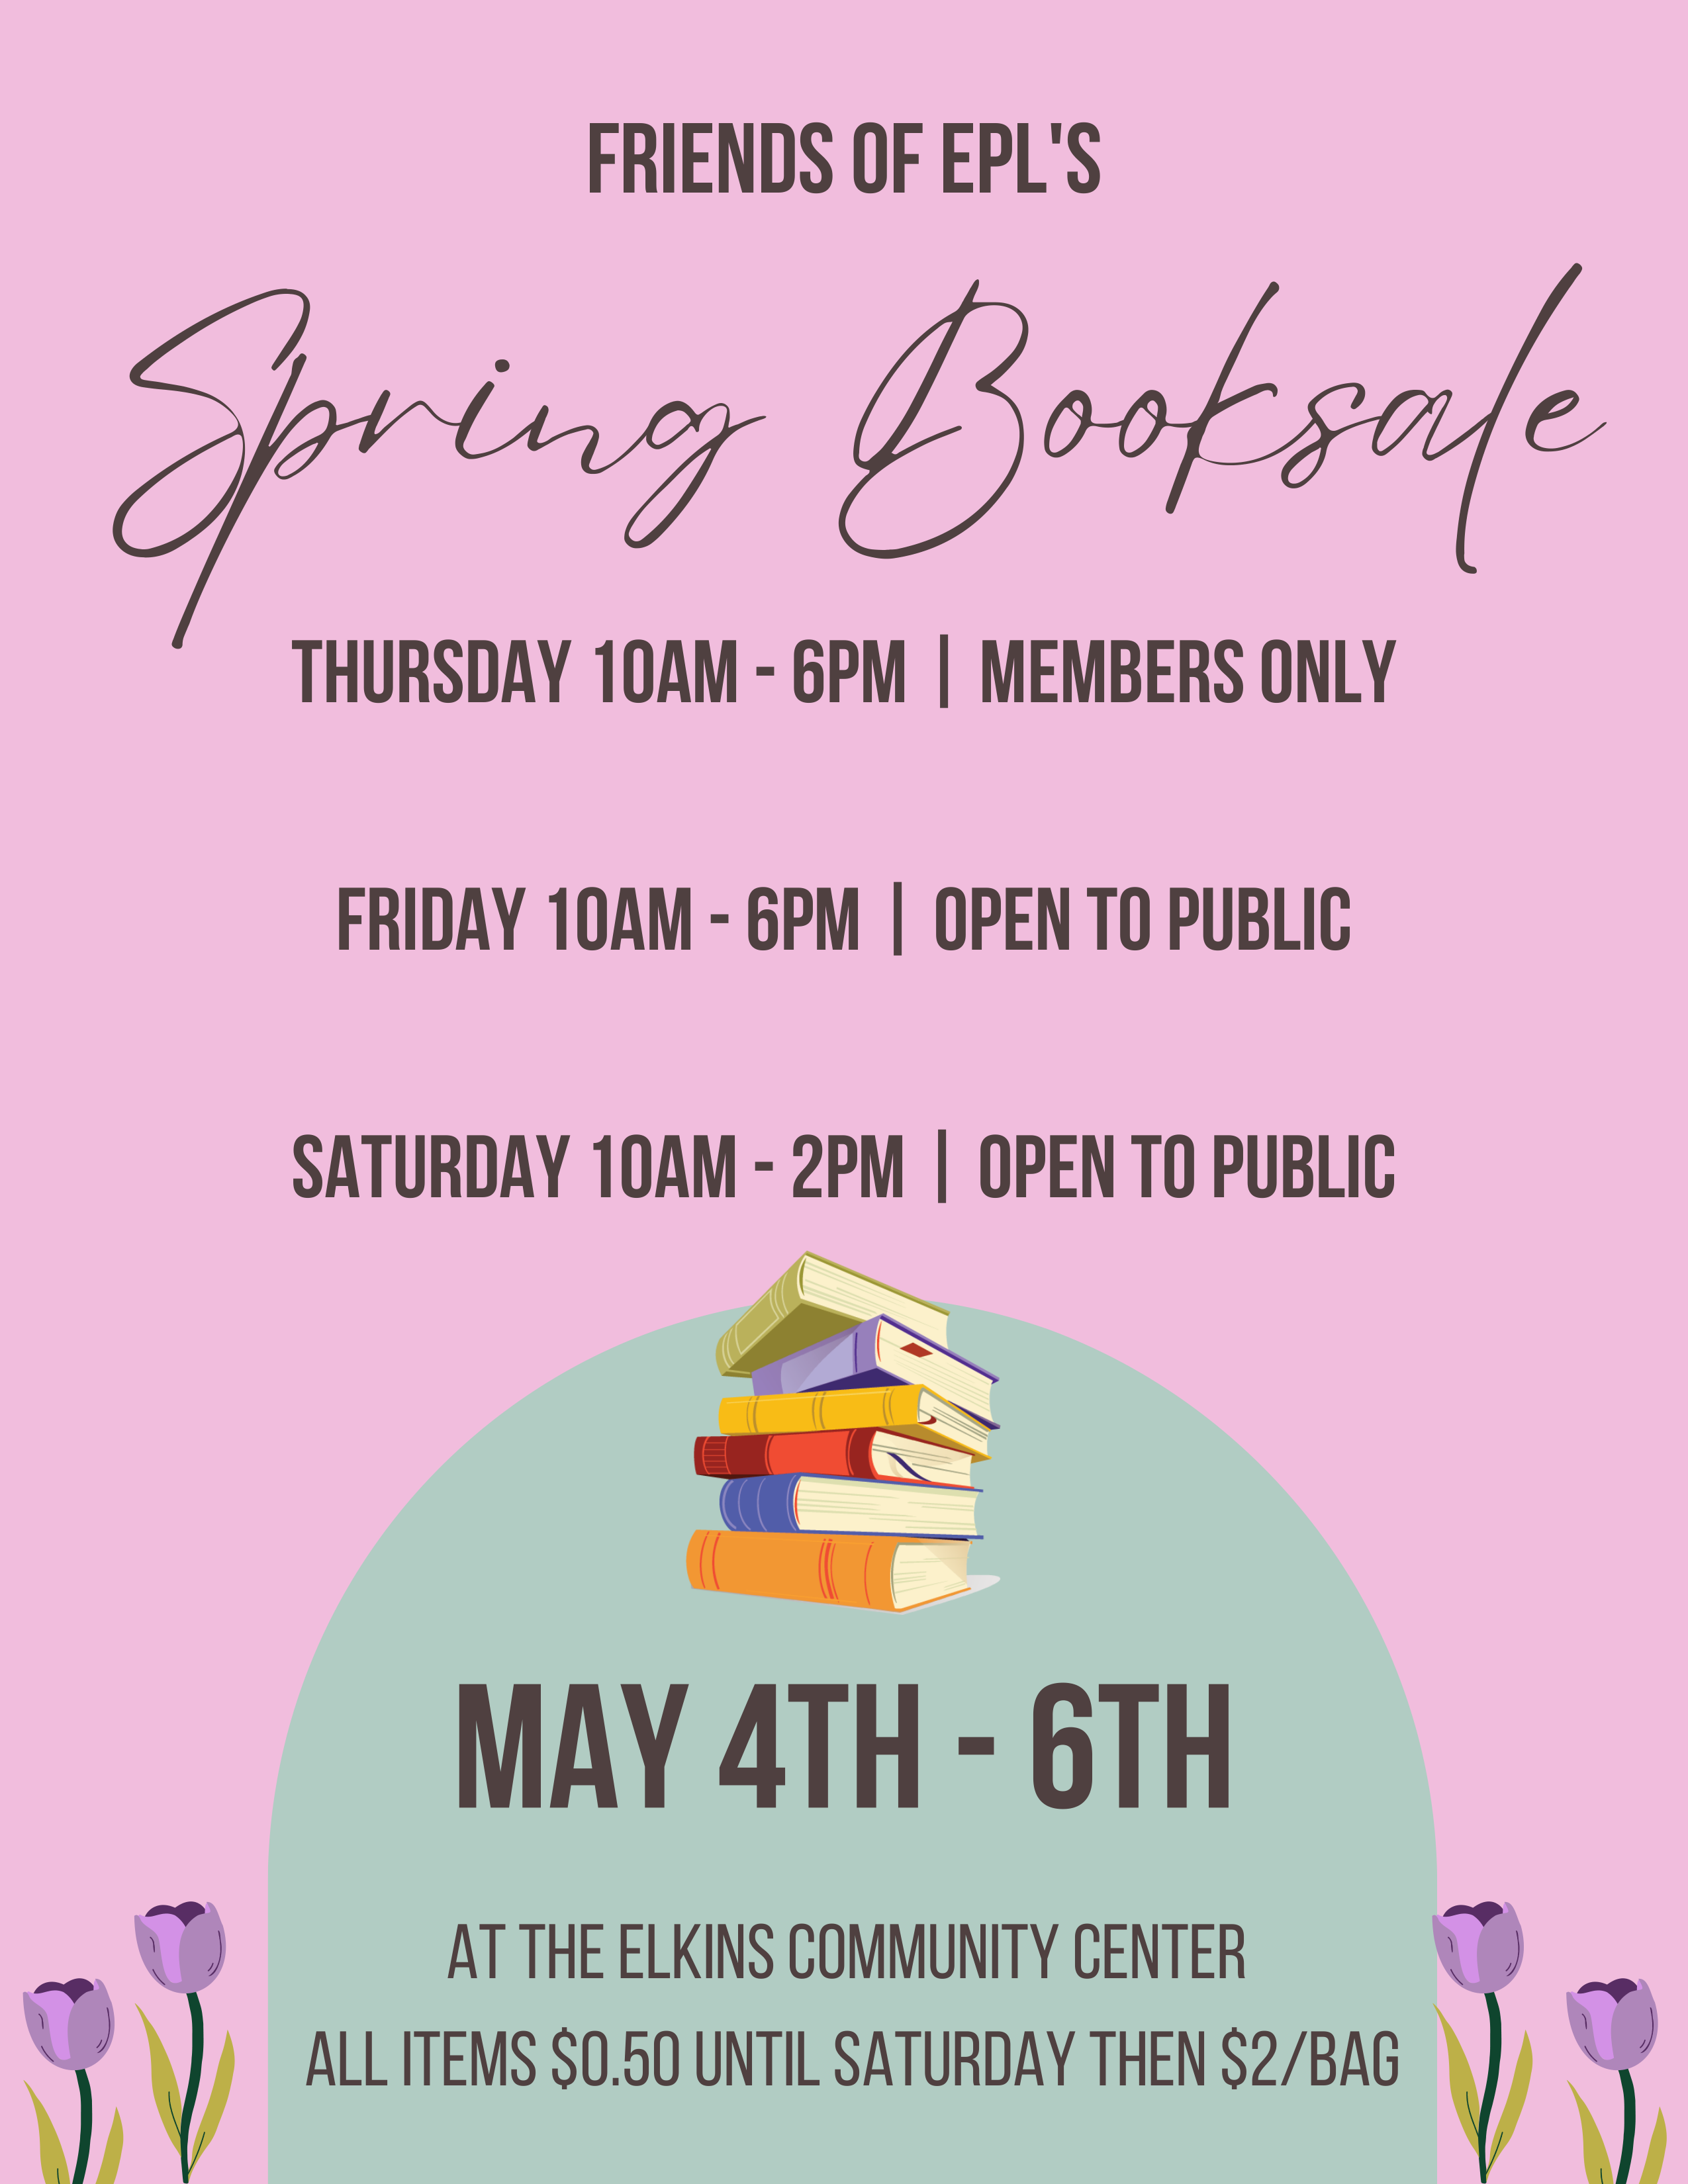 Sign up to help at the FOEPL Book Sale!